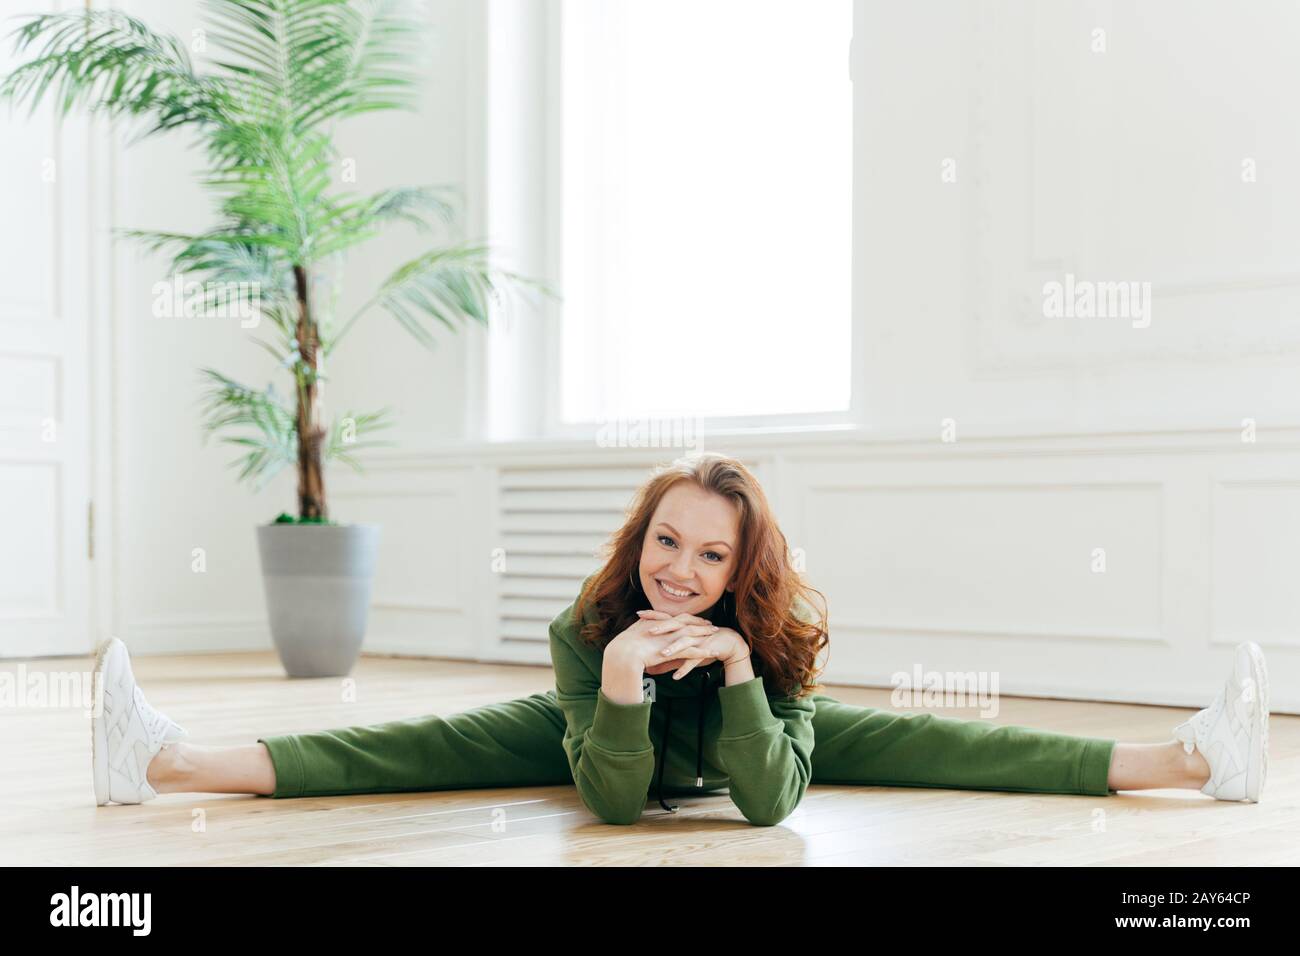 Fitness woman demonstrates nice flexibility, does gymnastics exercises, shows leg split, keeps hands under chin, smiles broadly, poses on floor in spa Stock Photo